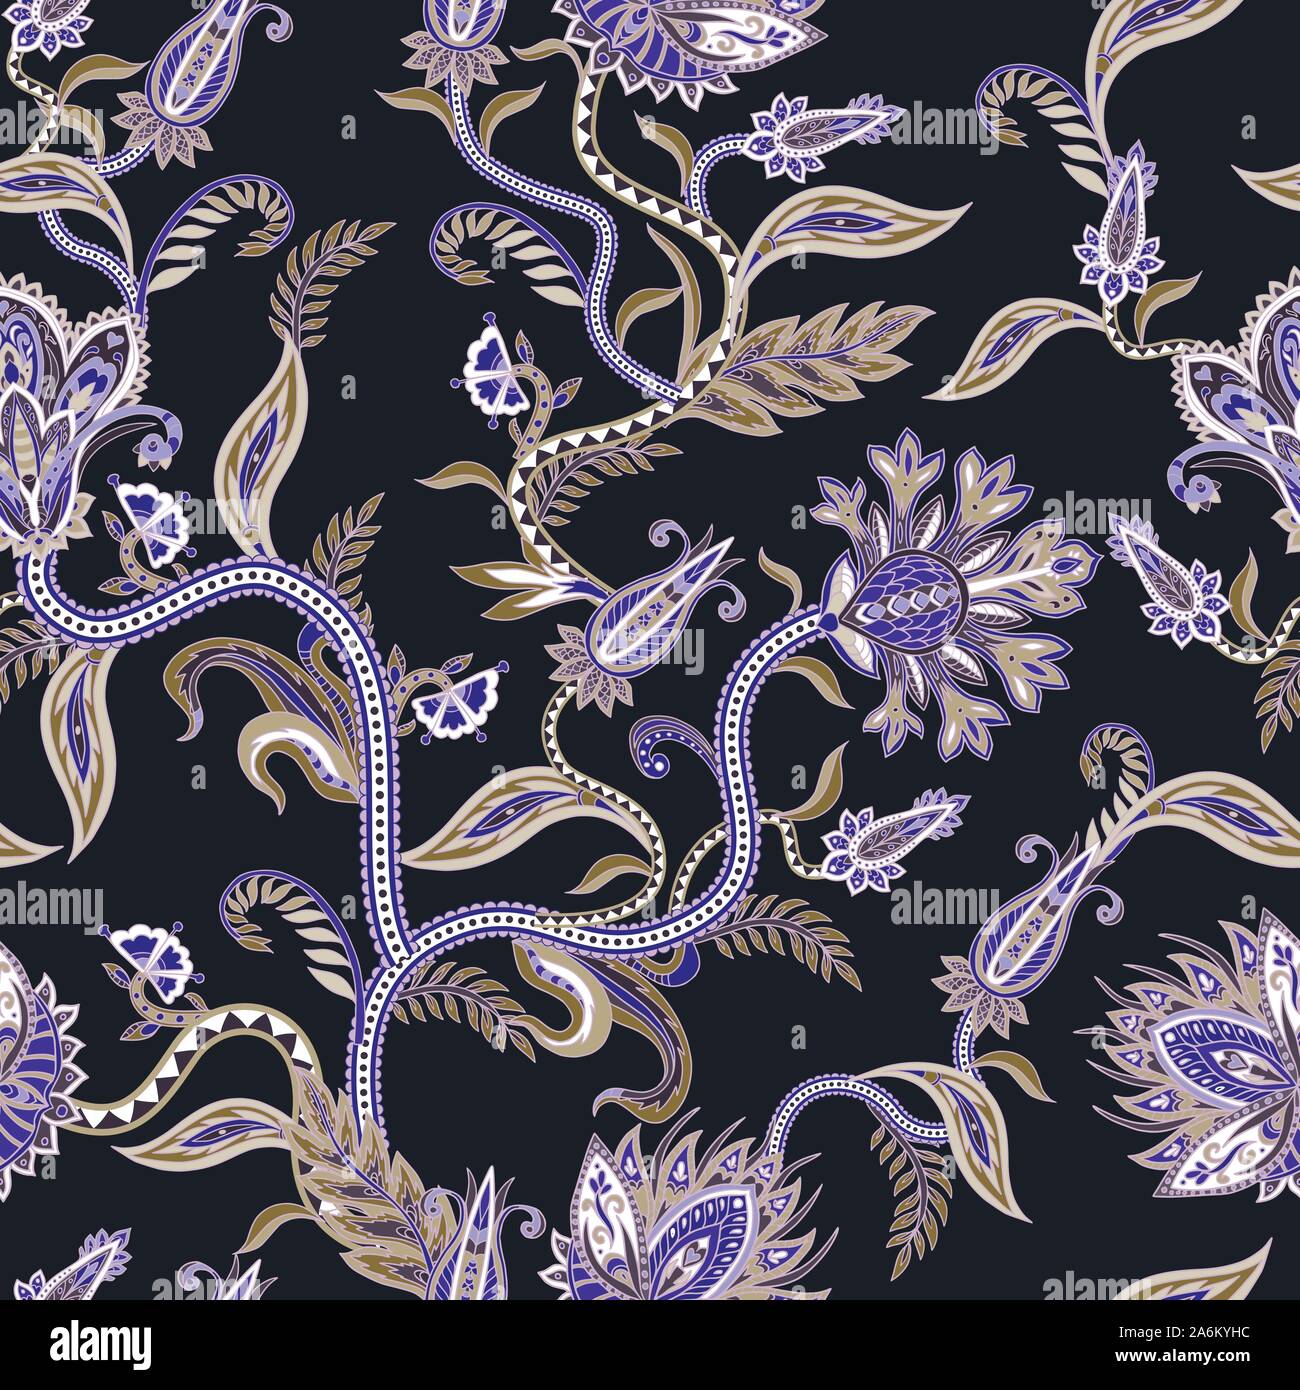 Seamless pattern with ethnic ornament elements and paisleys. Folk flowers and leaves for print or embroidery. Stock Vector